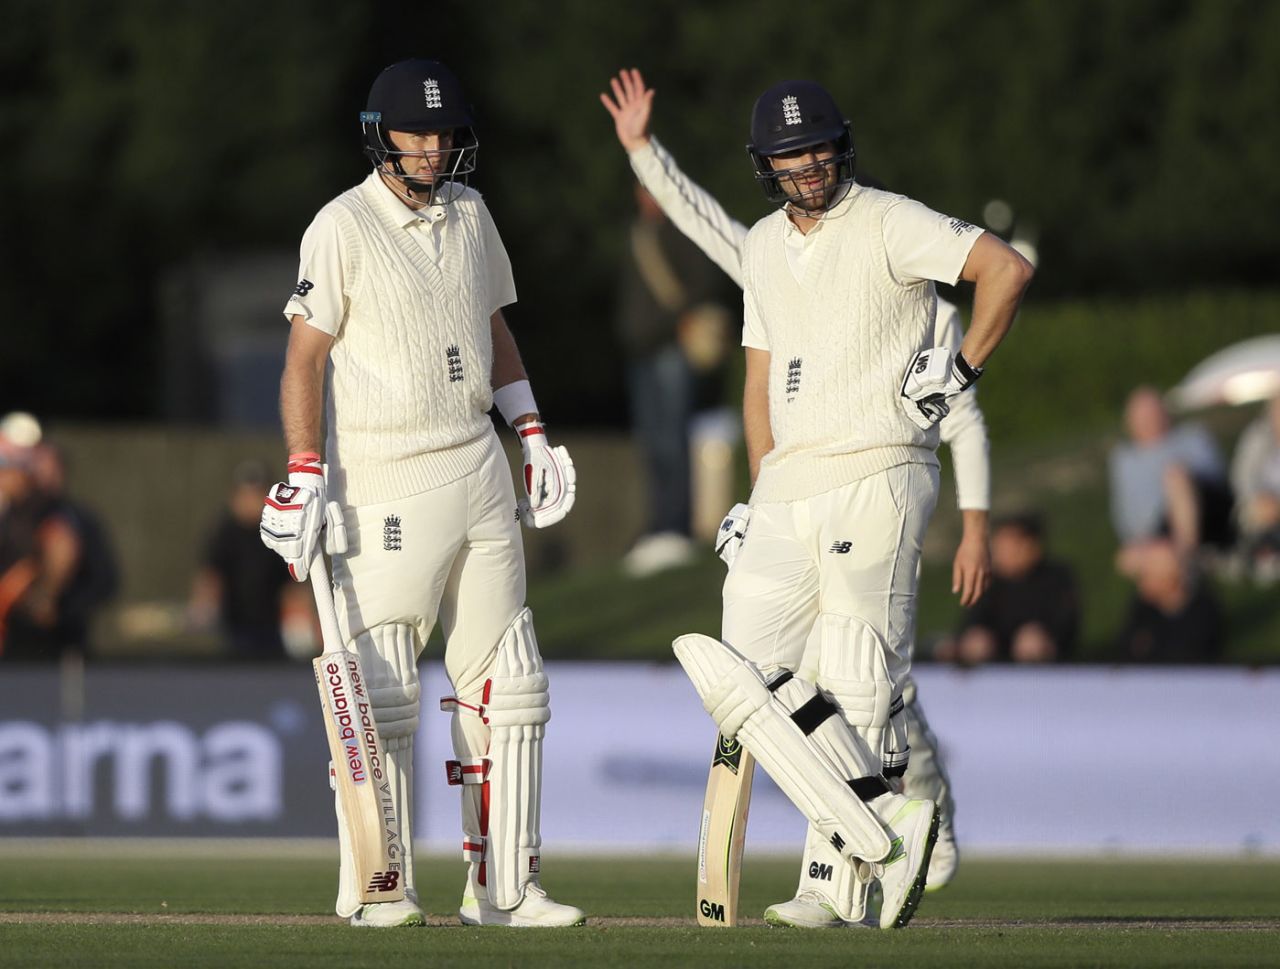 Joe Root and Dawid Malan kept each other company until the close, New Zealand v England, 2nd Test, Christchurch, 3rd day, April 1, 2018